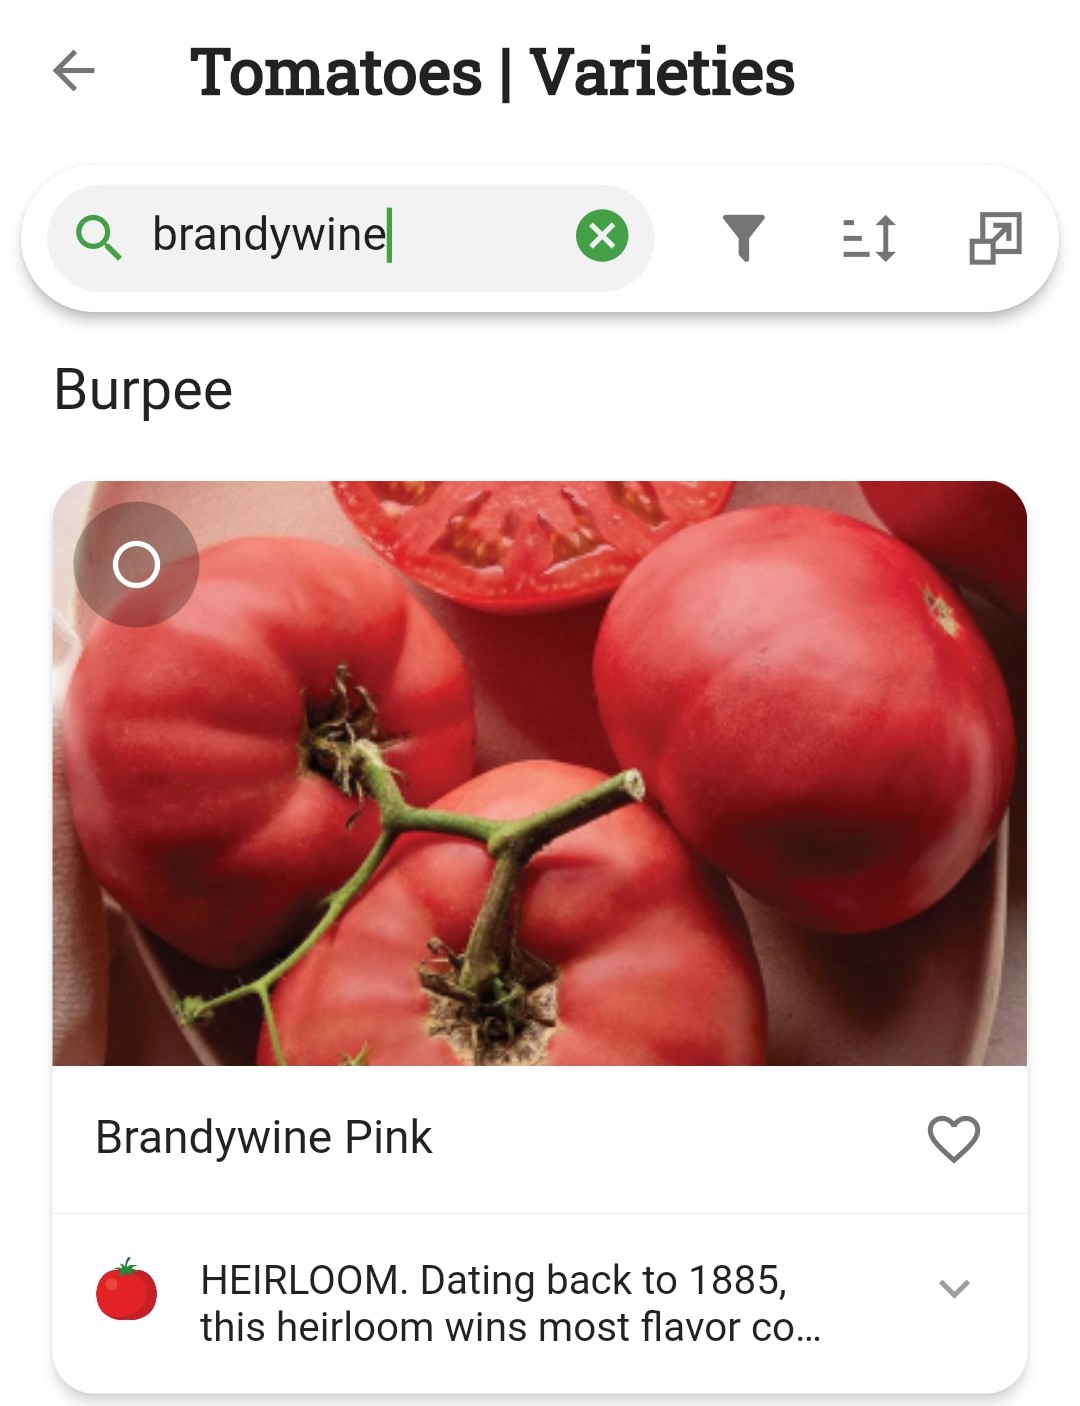 Screenshot of variety search for brandywine tomatoes